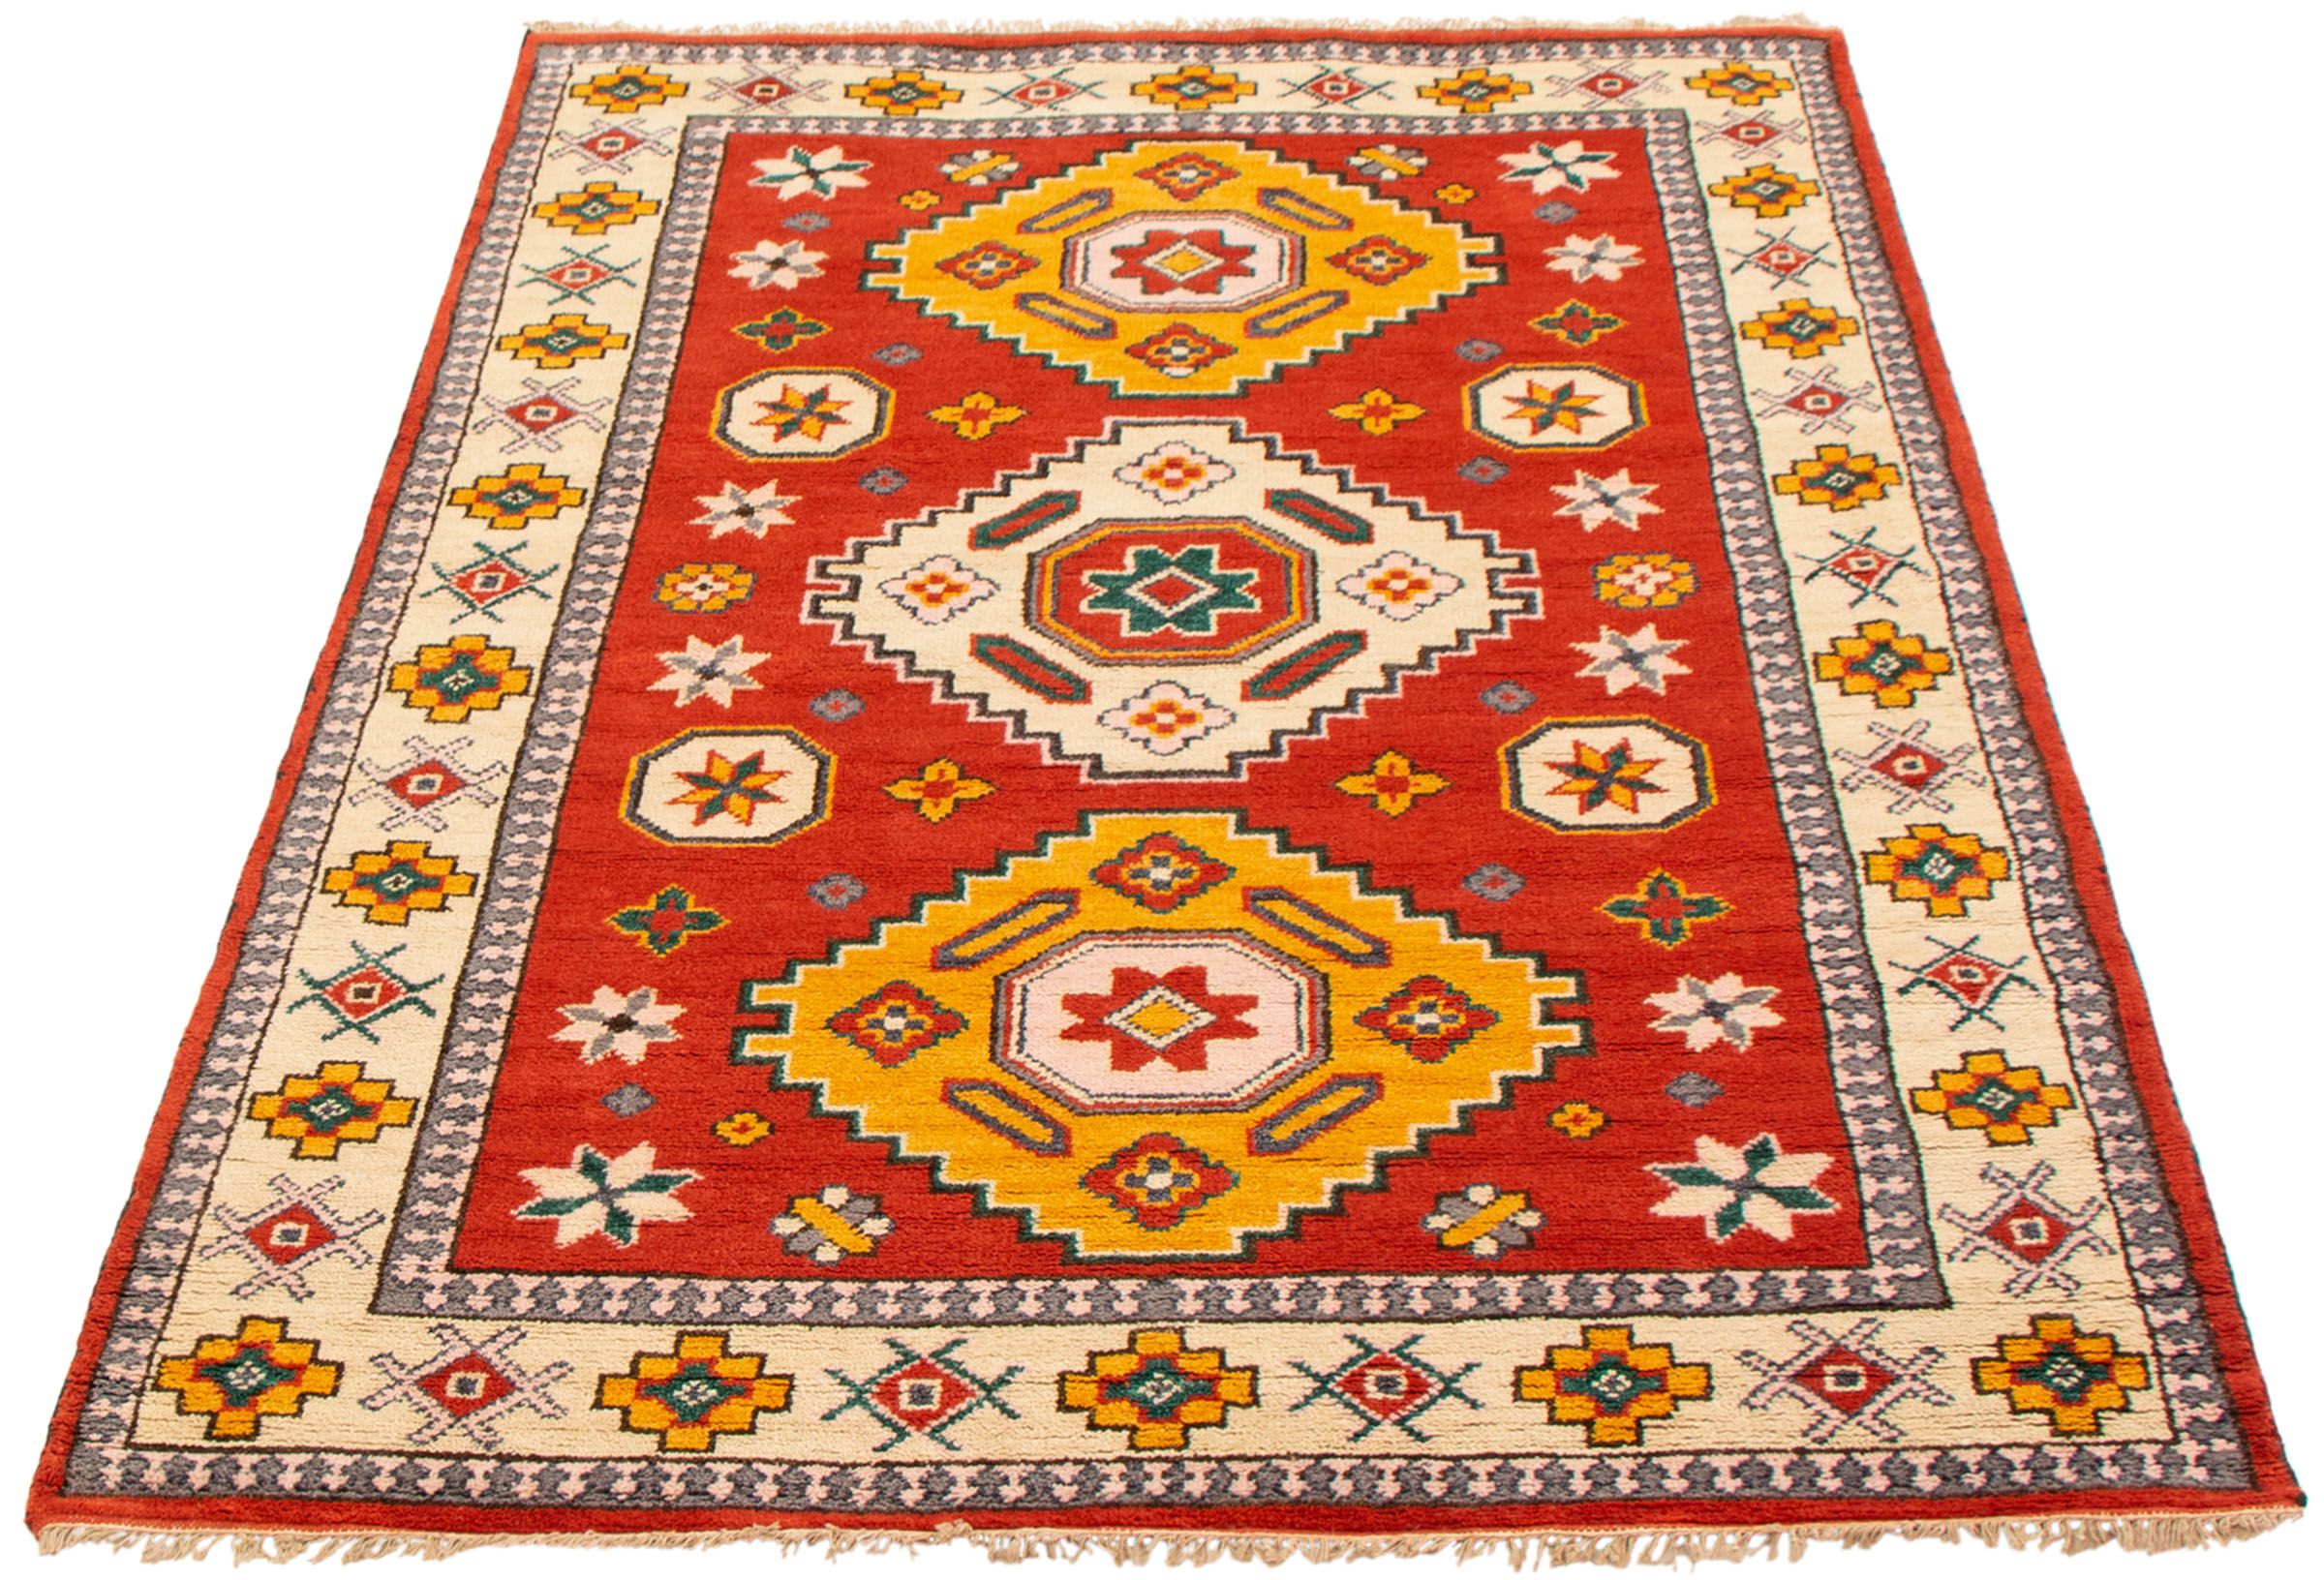 Hand-Knotted Wool Rug Finest Khal Mohammadi Bordered Red Rug 5'9 x 8'0 Bedroom eCarpet Gallery Area Rug for Living Room 360410 